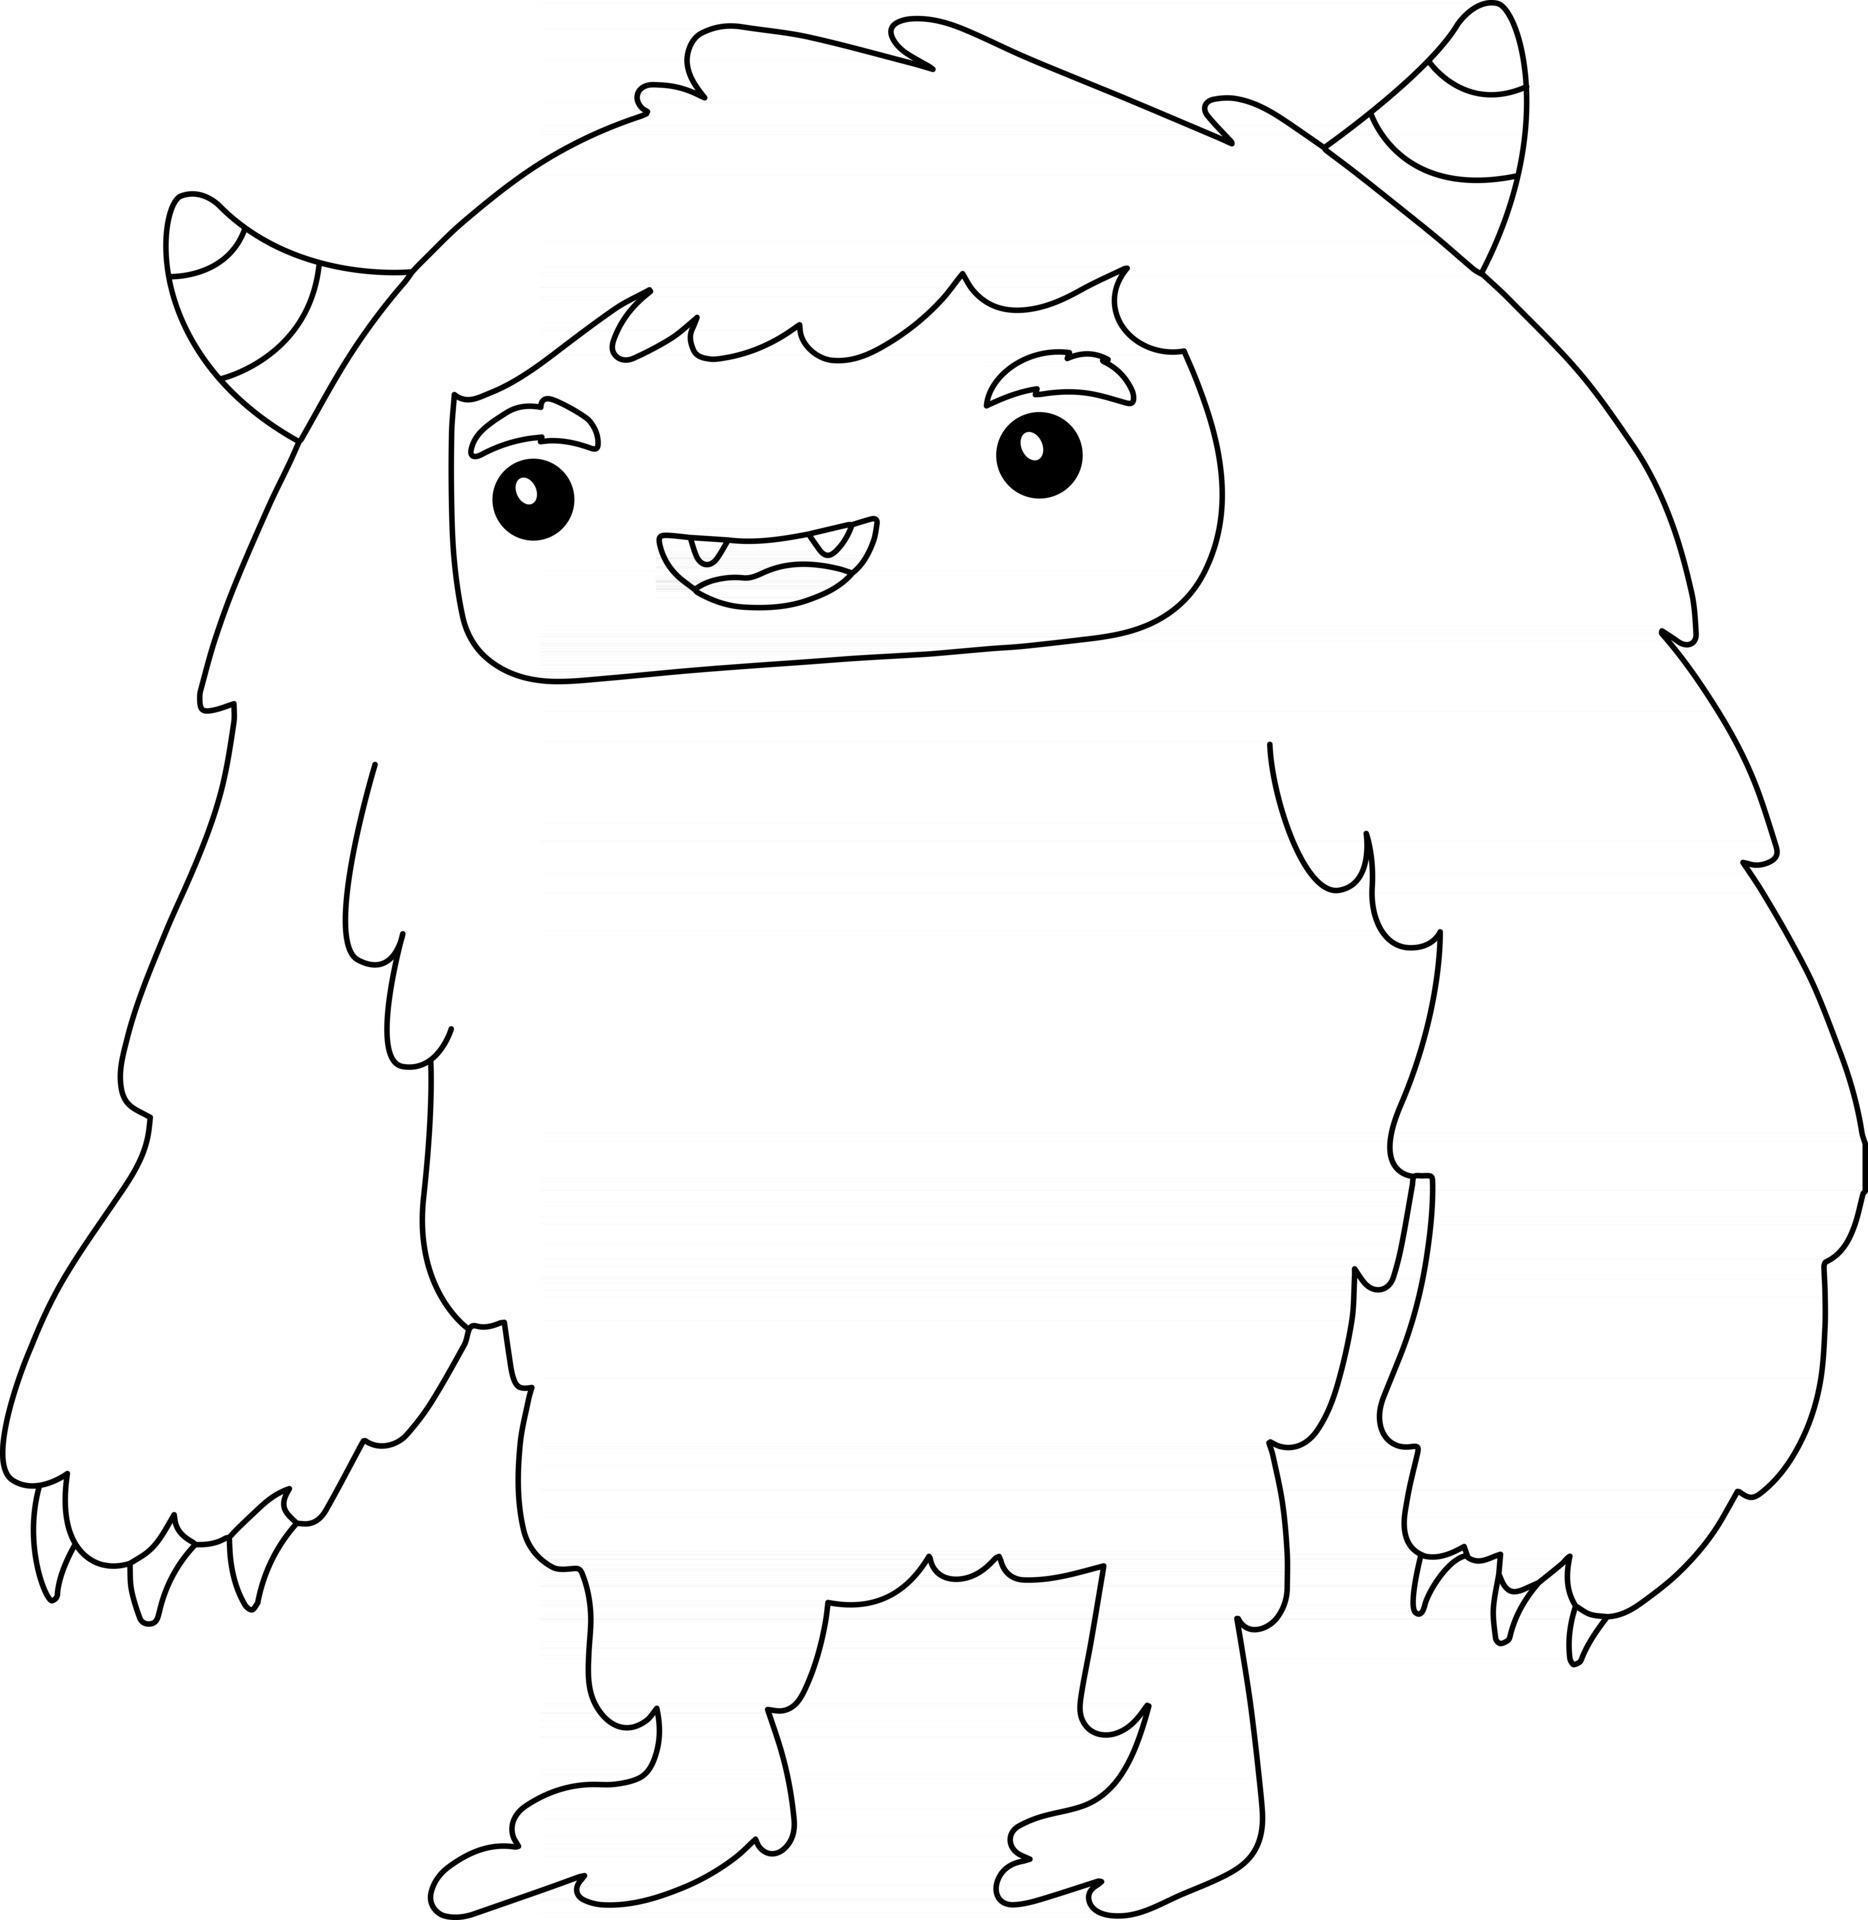 Yeti Kids Coloring Page Great for Beginner Coloring Book 2468197 Vector